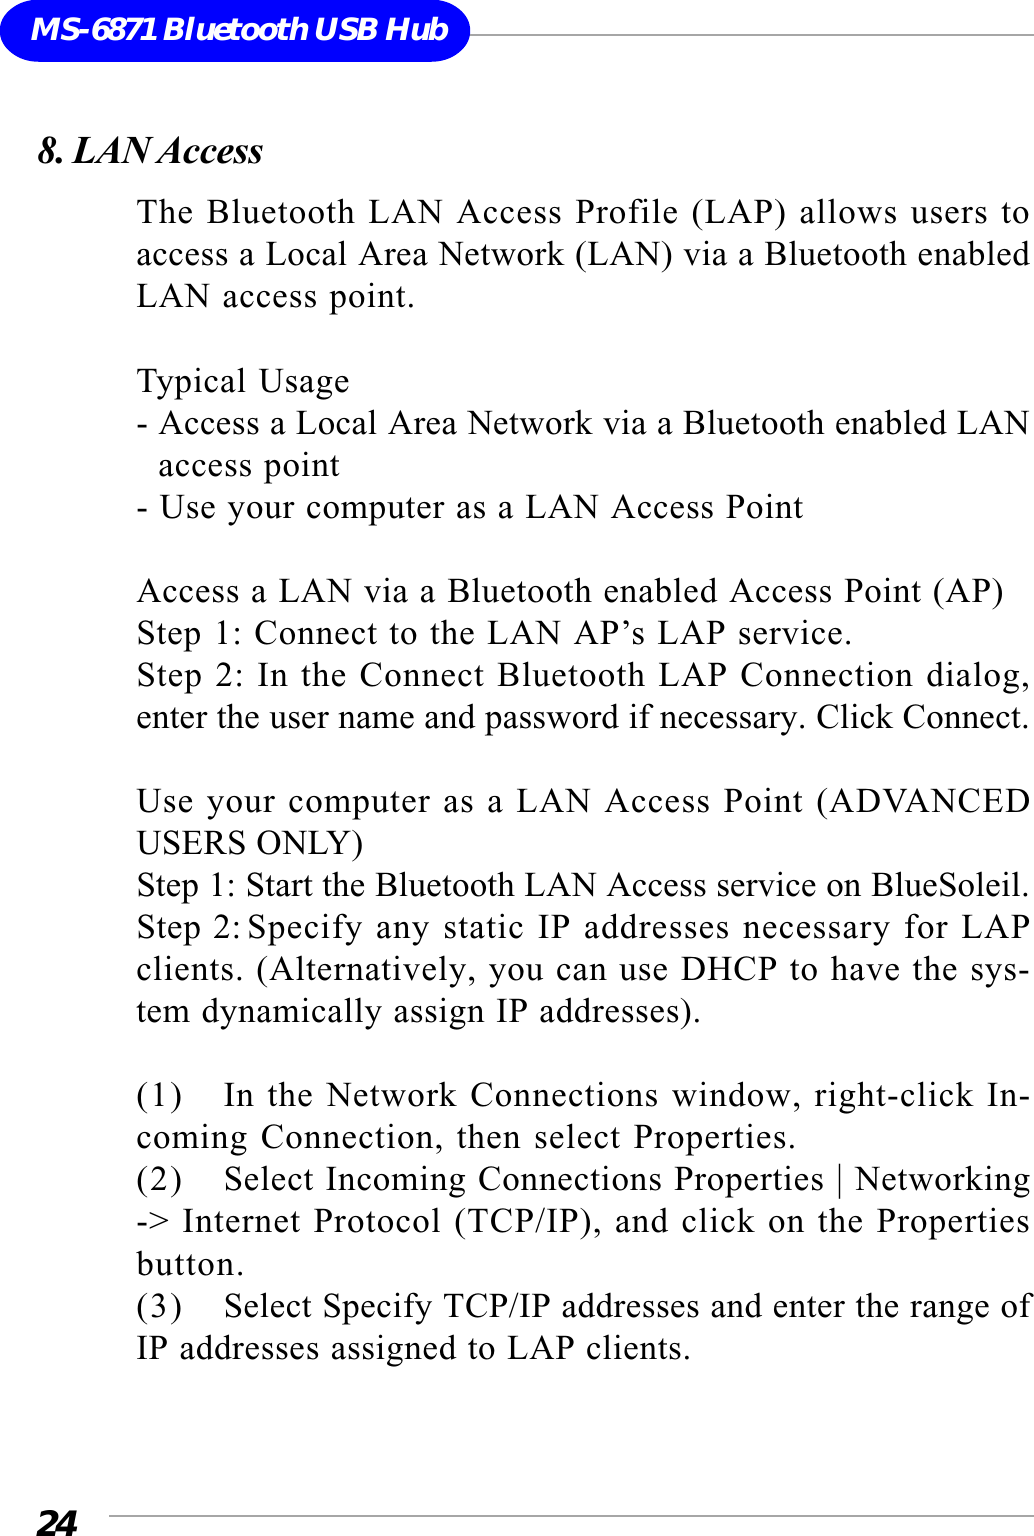 24MS-6871 Bluetooth USB Hub8. LAN AccessThe Bluetooth LAN Access Profile (LAP) allows users toaccess a Local Area Network (LAN) via a Bluetooth enabledLAN access point.Typical Usage- Access a Local Area Network via a Bluetooth enabled LAN  access point- Use your computer as a LAN Access PointAccess a LAN via a Bluetooth enabled Access Point (AP)Step 1: Connect to the LAN AP’s LAP service.Step 2: In the Connect Bluetooth LAP Connection dialog,enter the user name and password if necessary. Click Connect.Use your computer as a LAN Access Point (ADVANCEDUSERS ONLY)Step 1: Start the Bluetooth LAN Access service on BlueSoleil.Step 2:Specify any static IP addresses necessary for LAPclients. (Alternatively, you can use DHCP to have the sys-tem dynamically assign IP addresses).(1) In the Network Connections window, right-click In-coming Connection, then select Properties.(2) Select Incoming Connections Properties | Networking-&gt; Internet Protocol (TCP/IP), and click on the Propertiesbutton.(3) Select Specify TCP/IP addresses and enter the range ofIP addresses assigned to LAP clients.